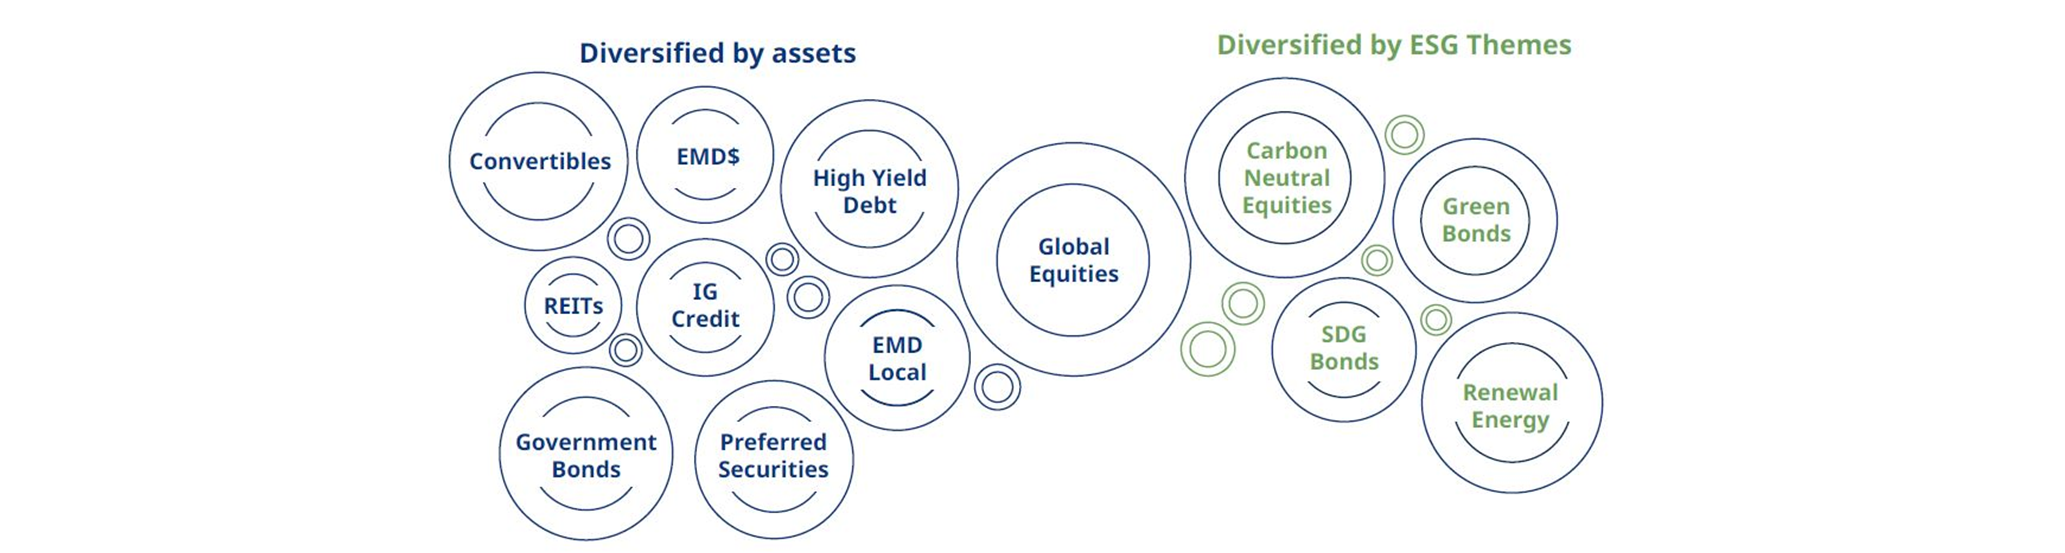 Diversified by assets and ESG themes